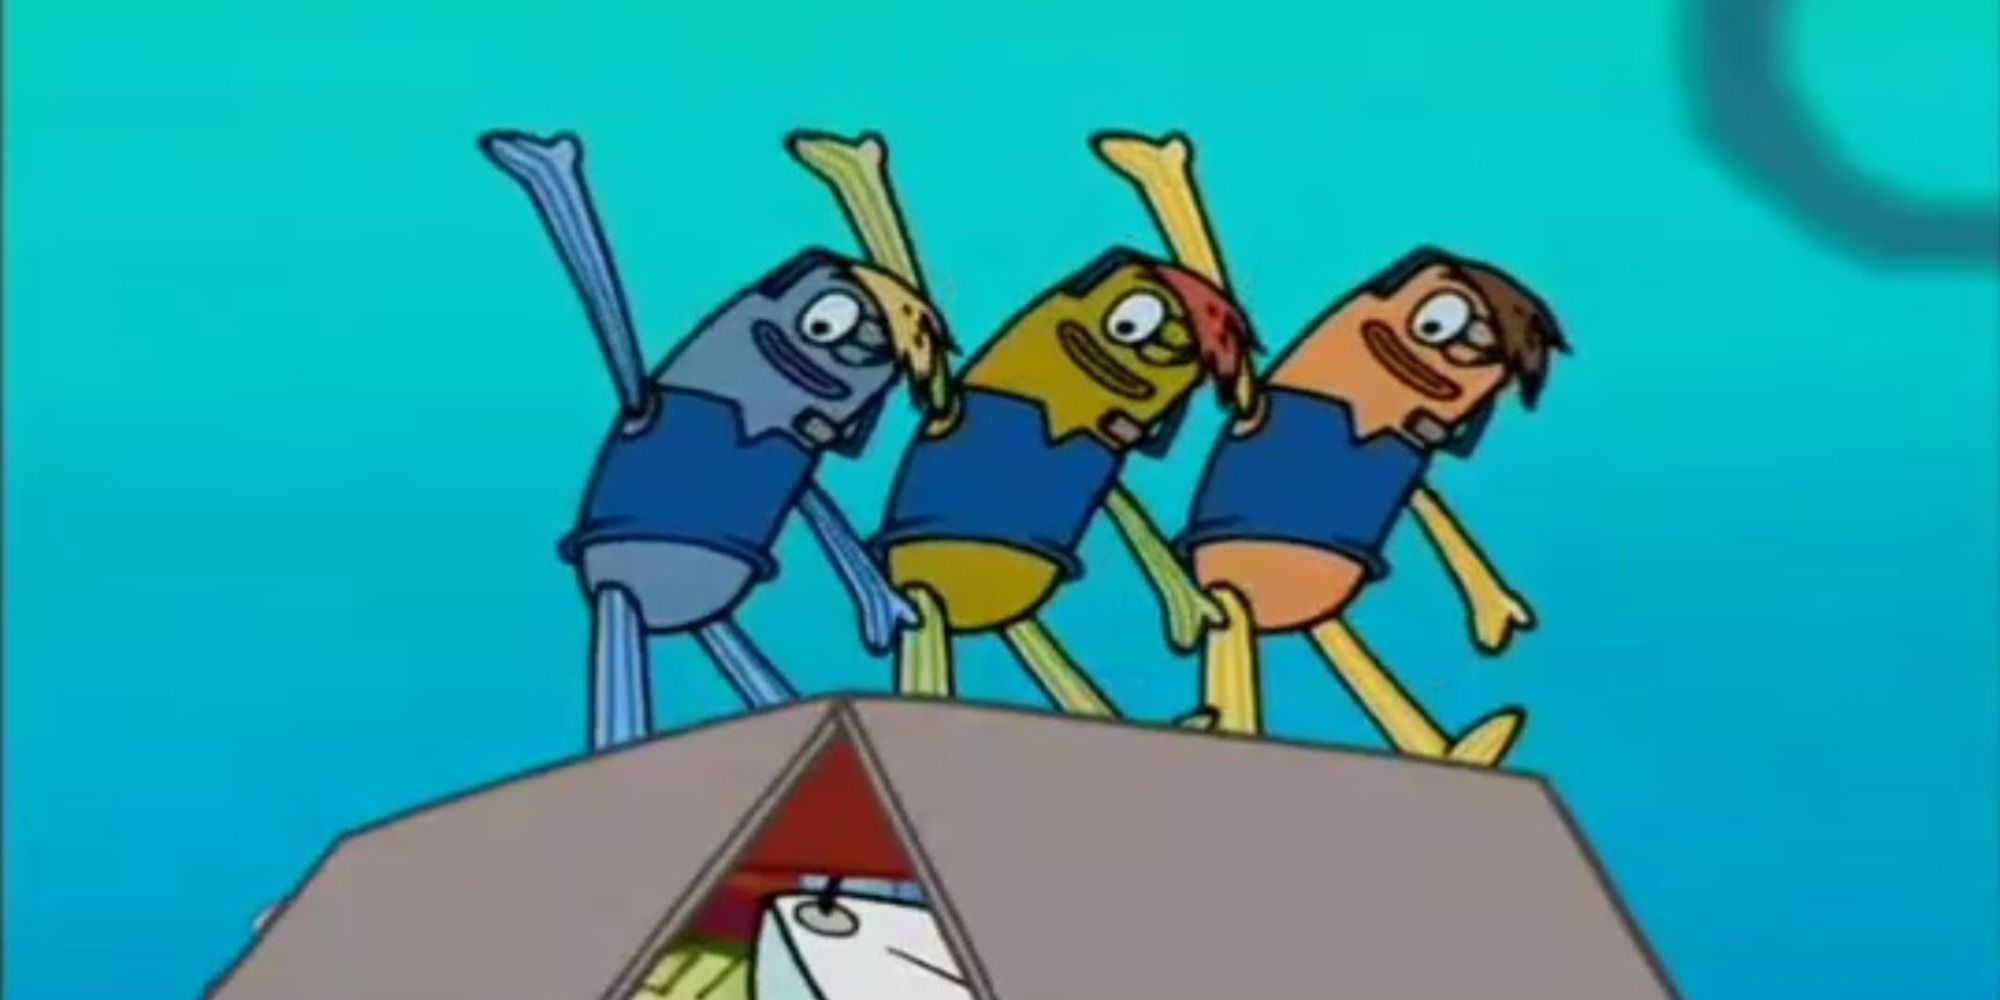 The band Boys Who Cry performing in Spongebob squarepants episode